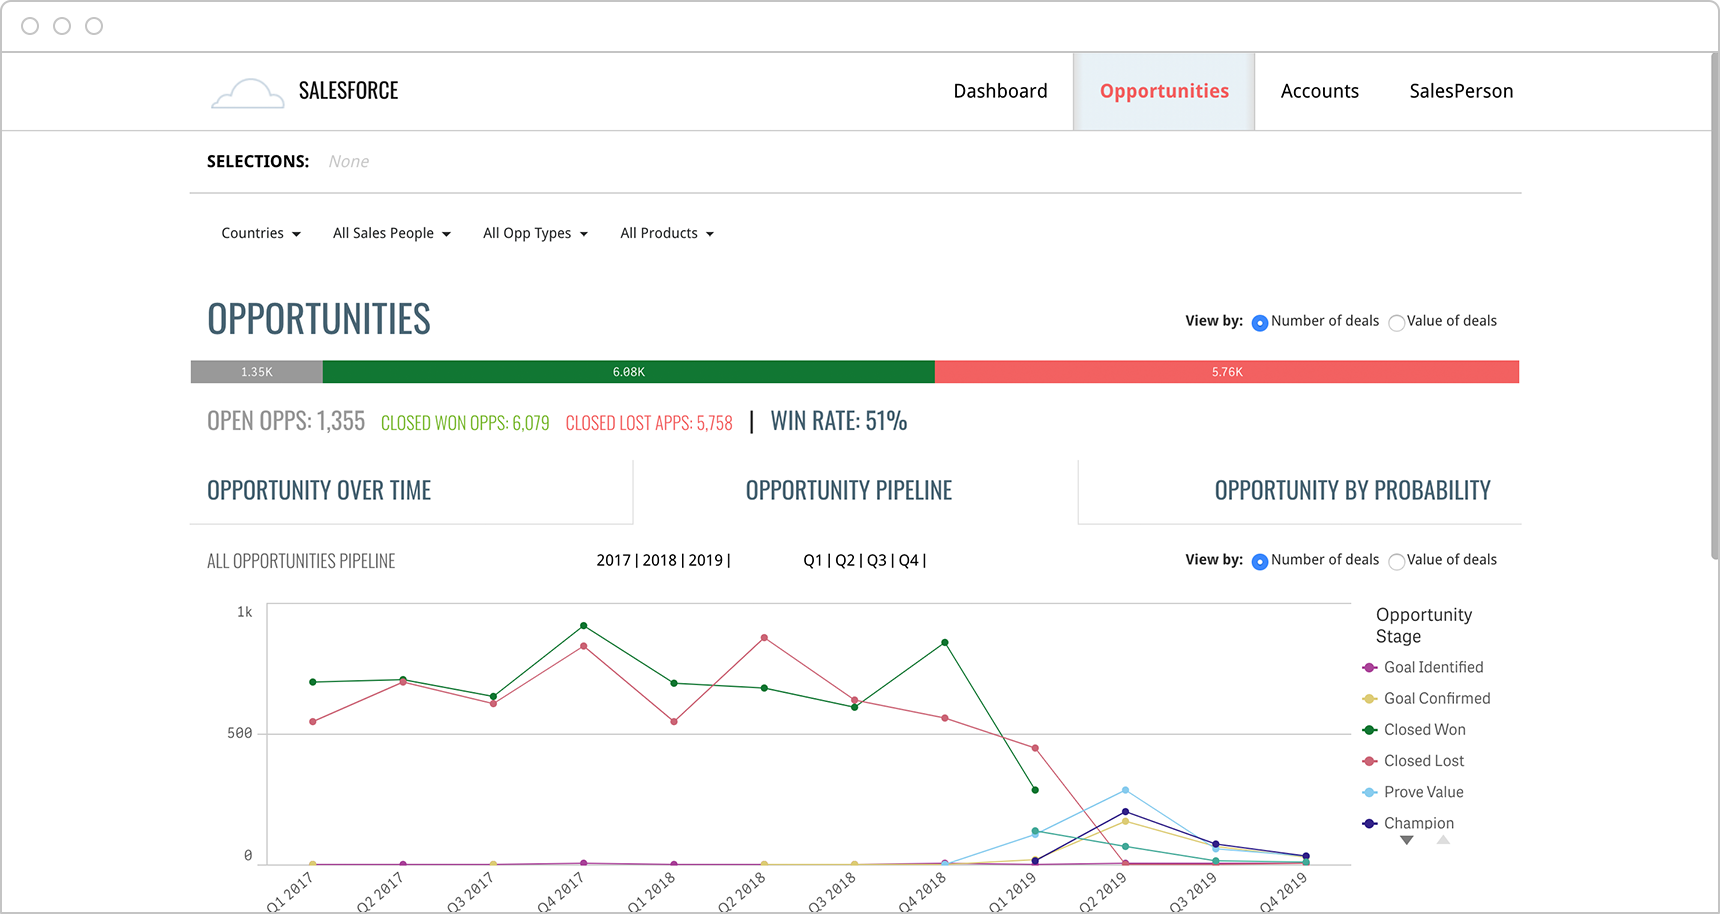 Qlik Salesforce dashboard allows salespeople to analyze pipeline and opportunities by probability by any time period.